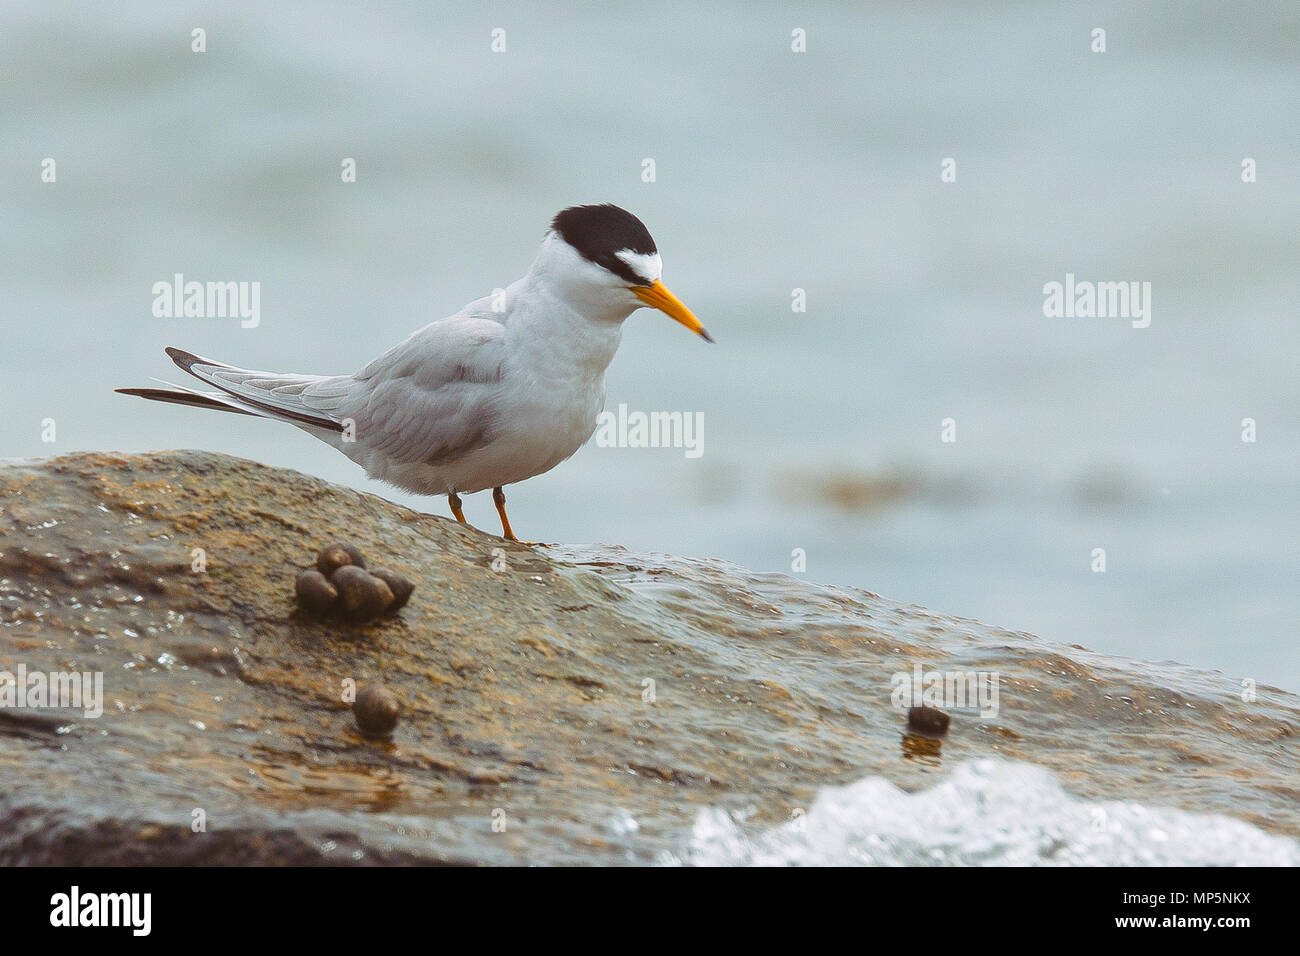 A Least Tern carefully watched the incoming tide as the waves wash over his perch. Stock Photo